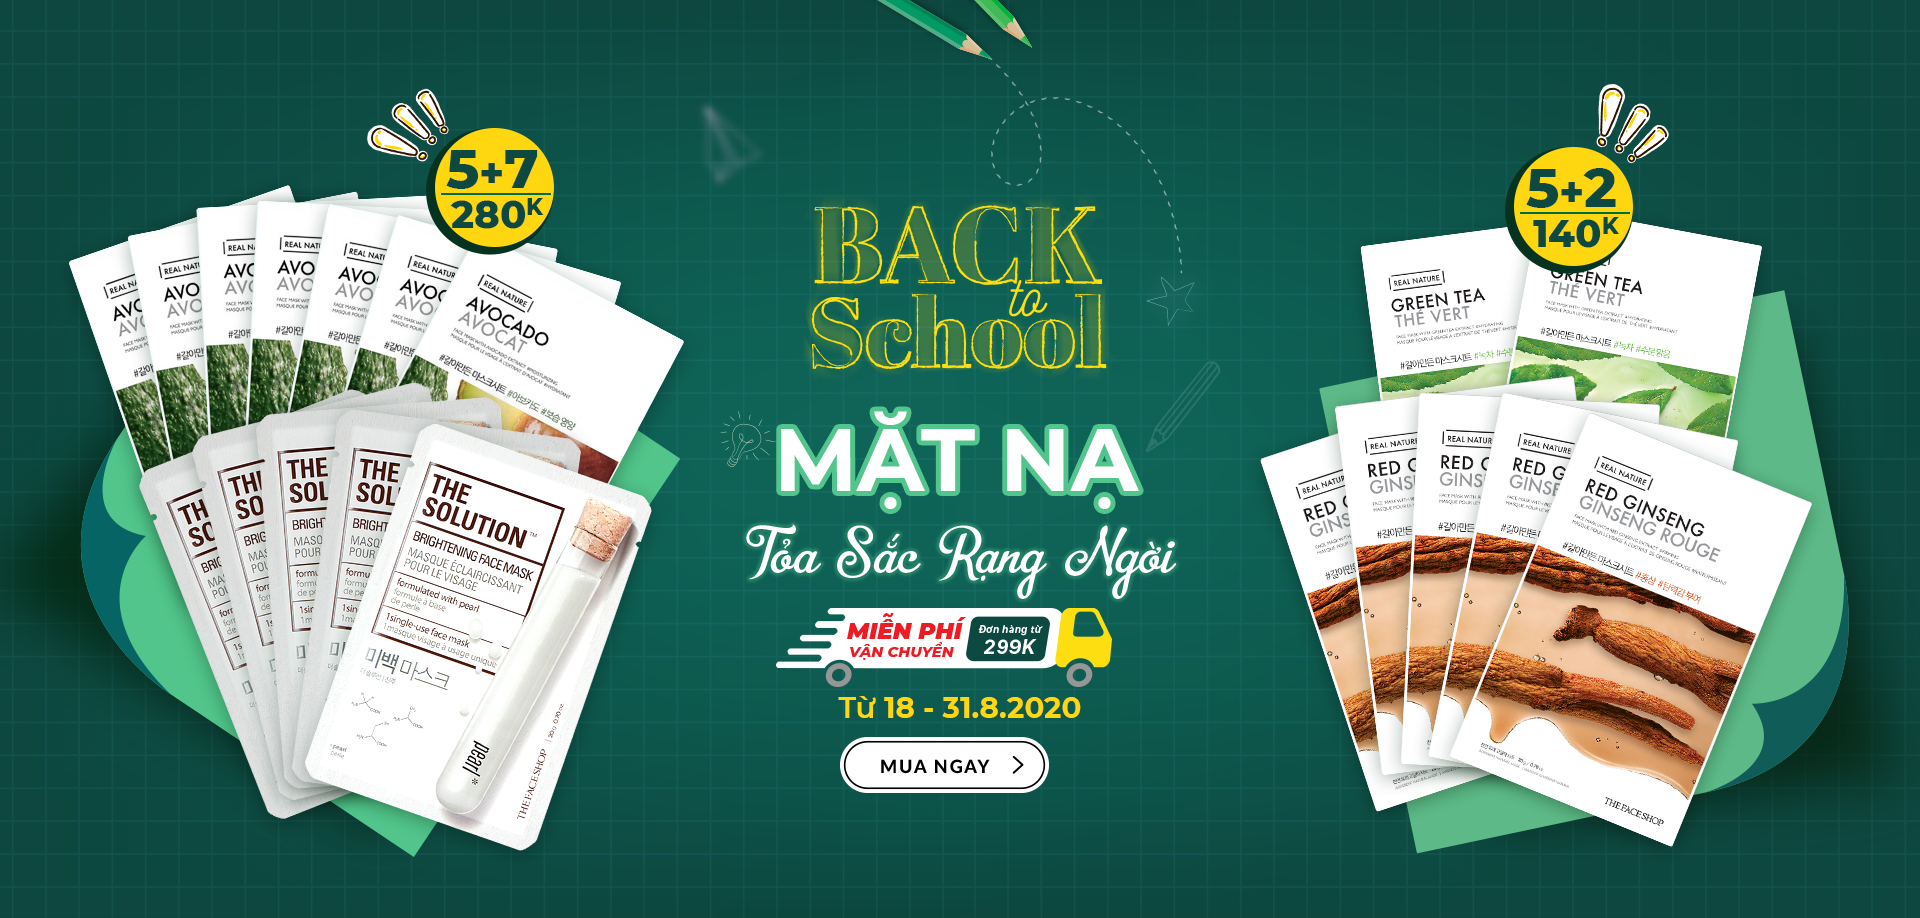 CT Back To School - Other Mask Mua 5 Tặng 7 (18-31.08)